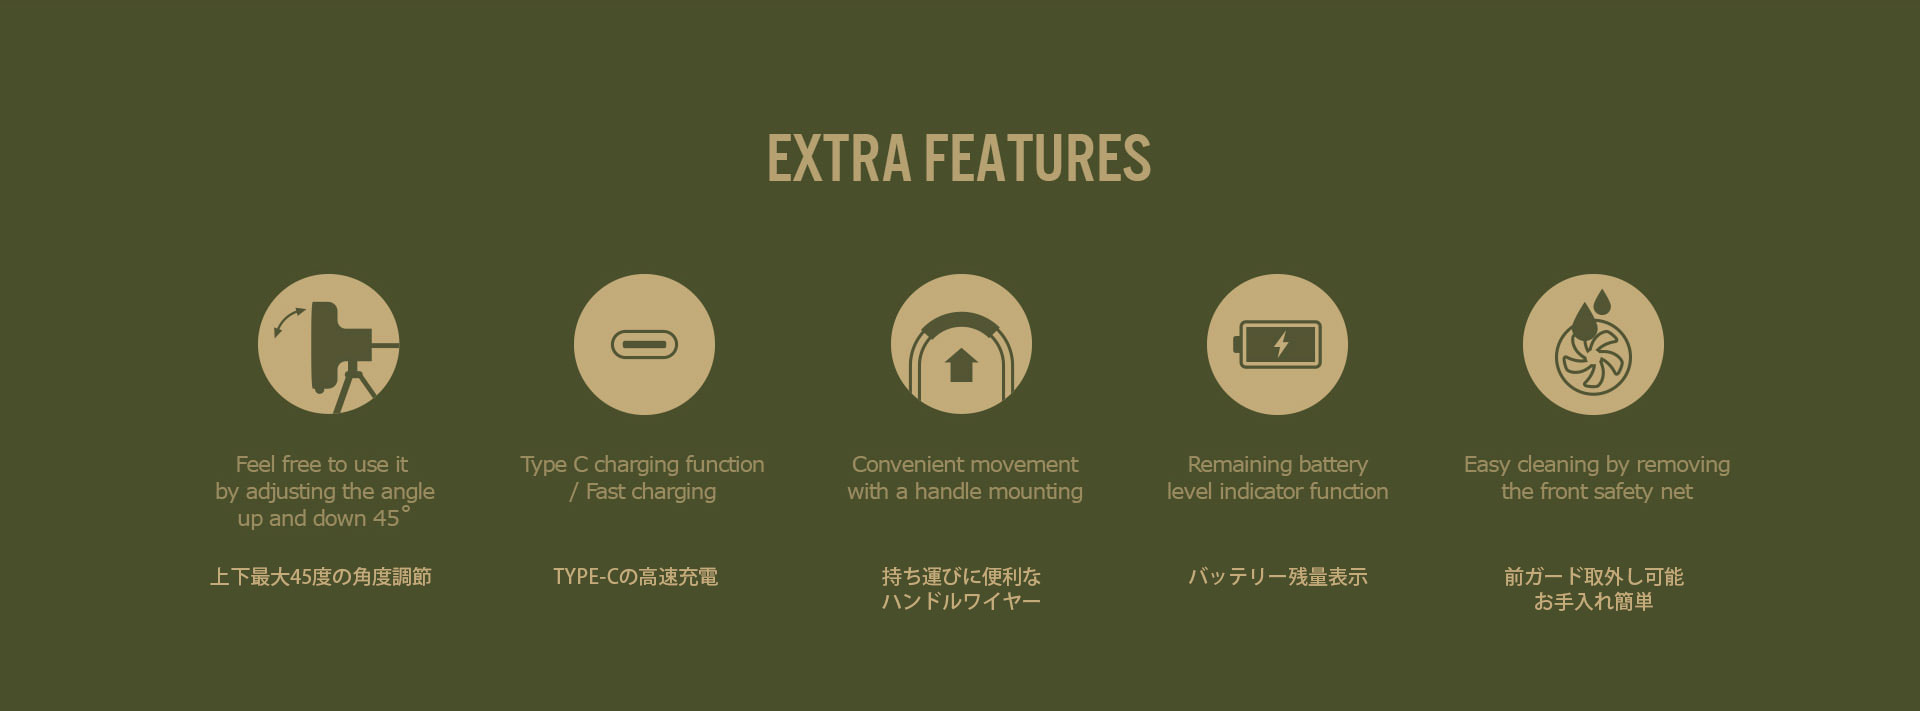 EXTRA FEATURES